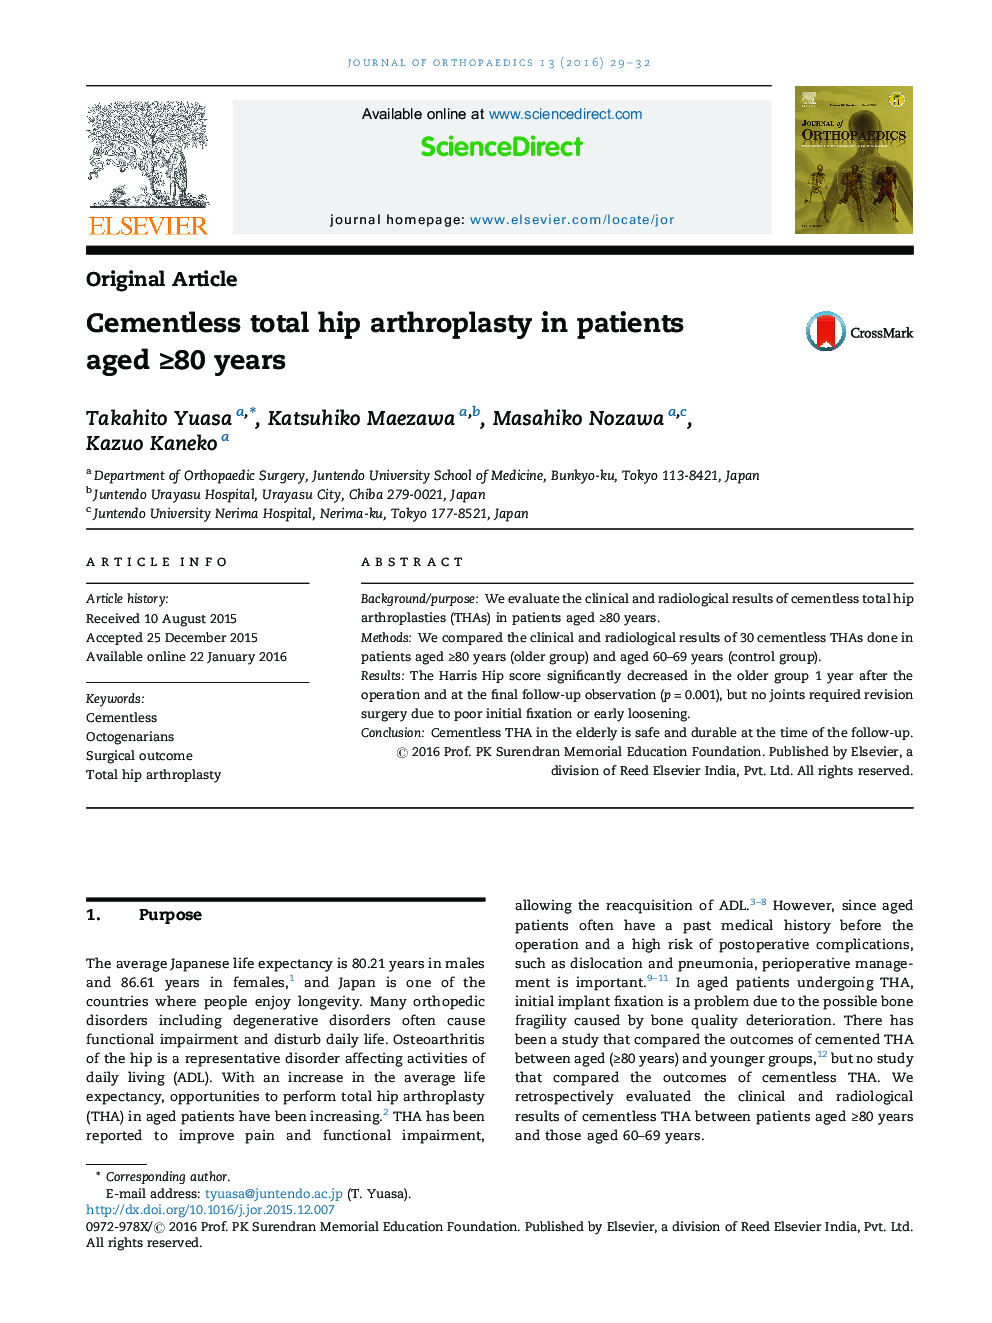 Cementless total hip arthroplasty in patients aged ≥80 years